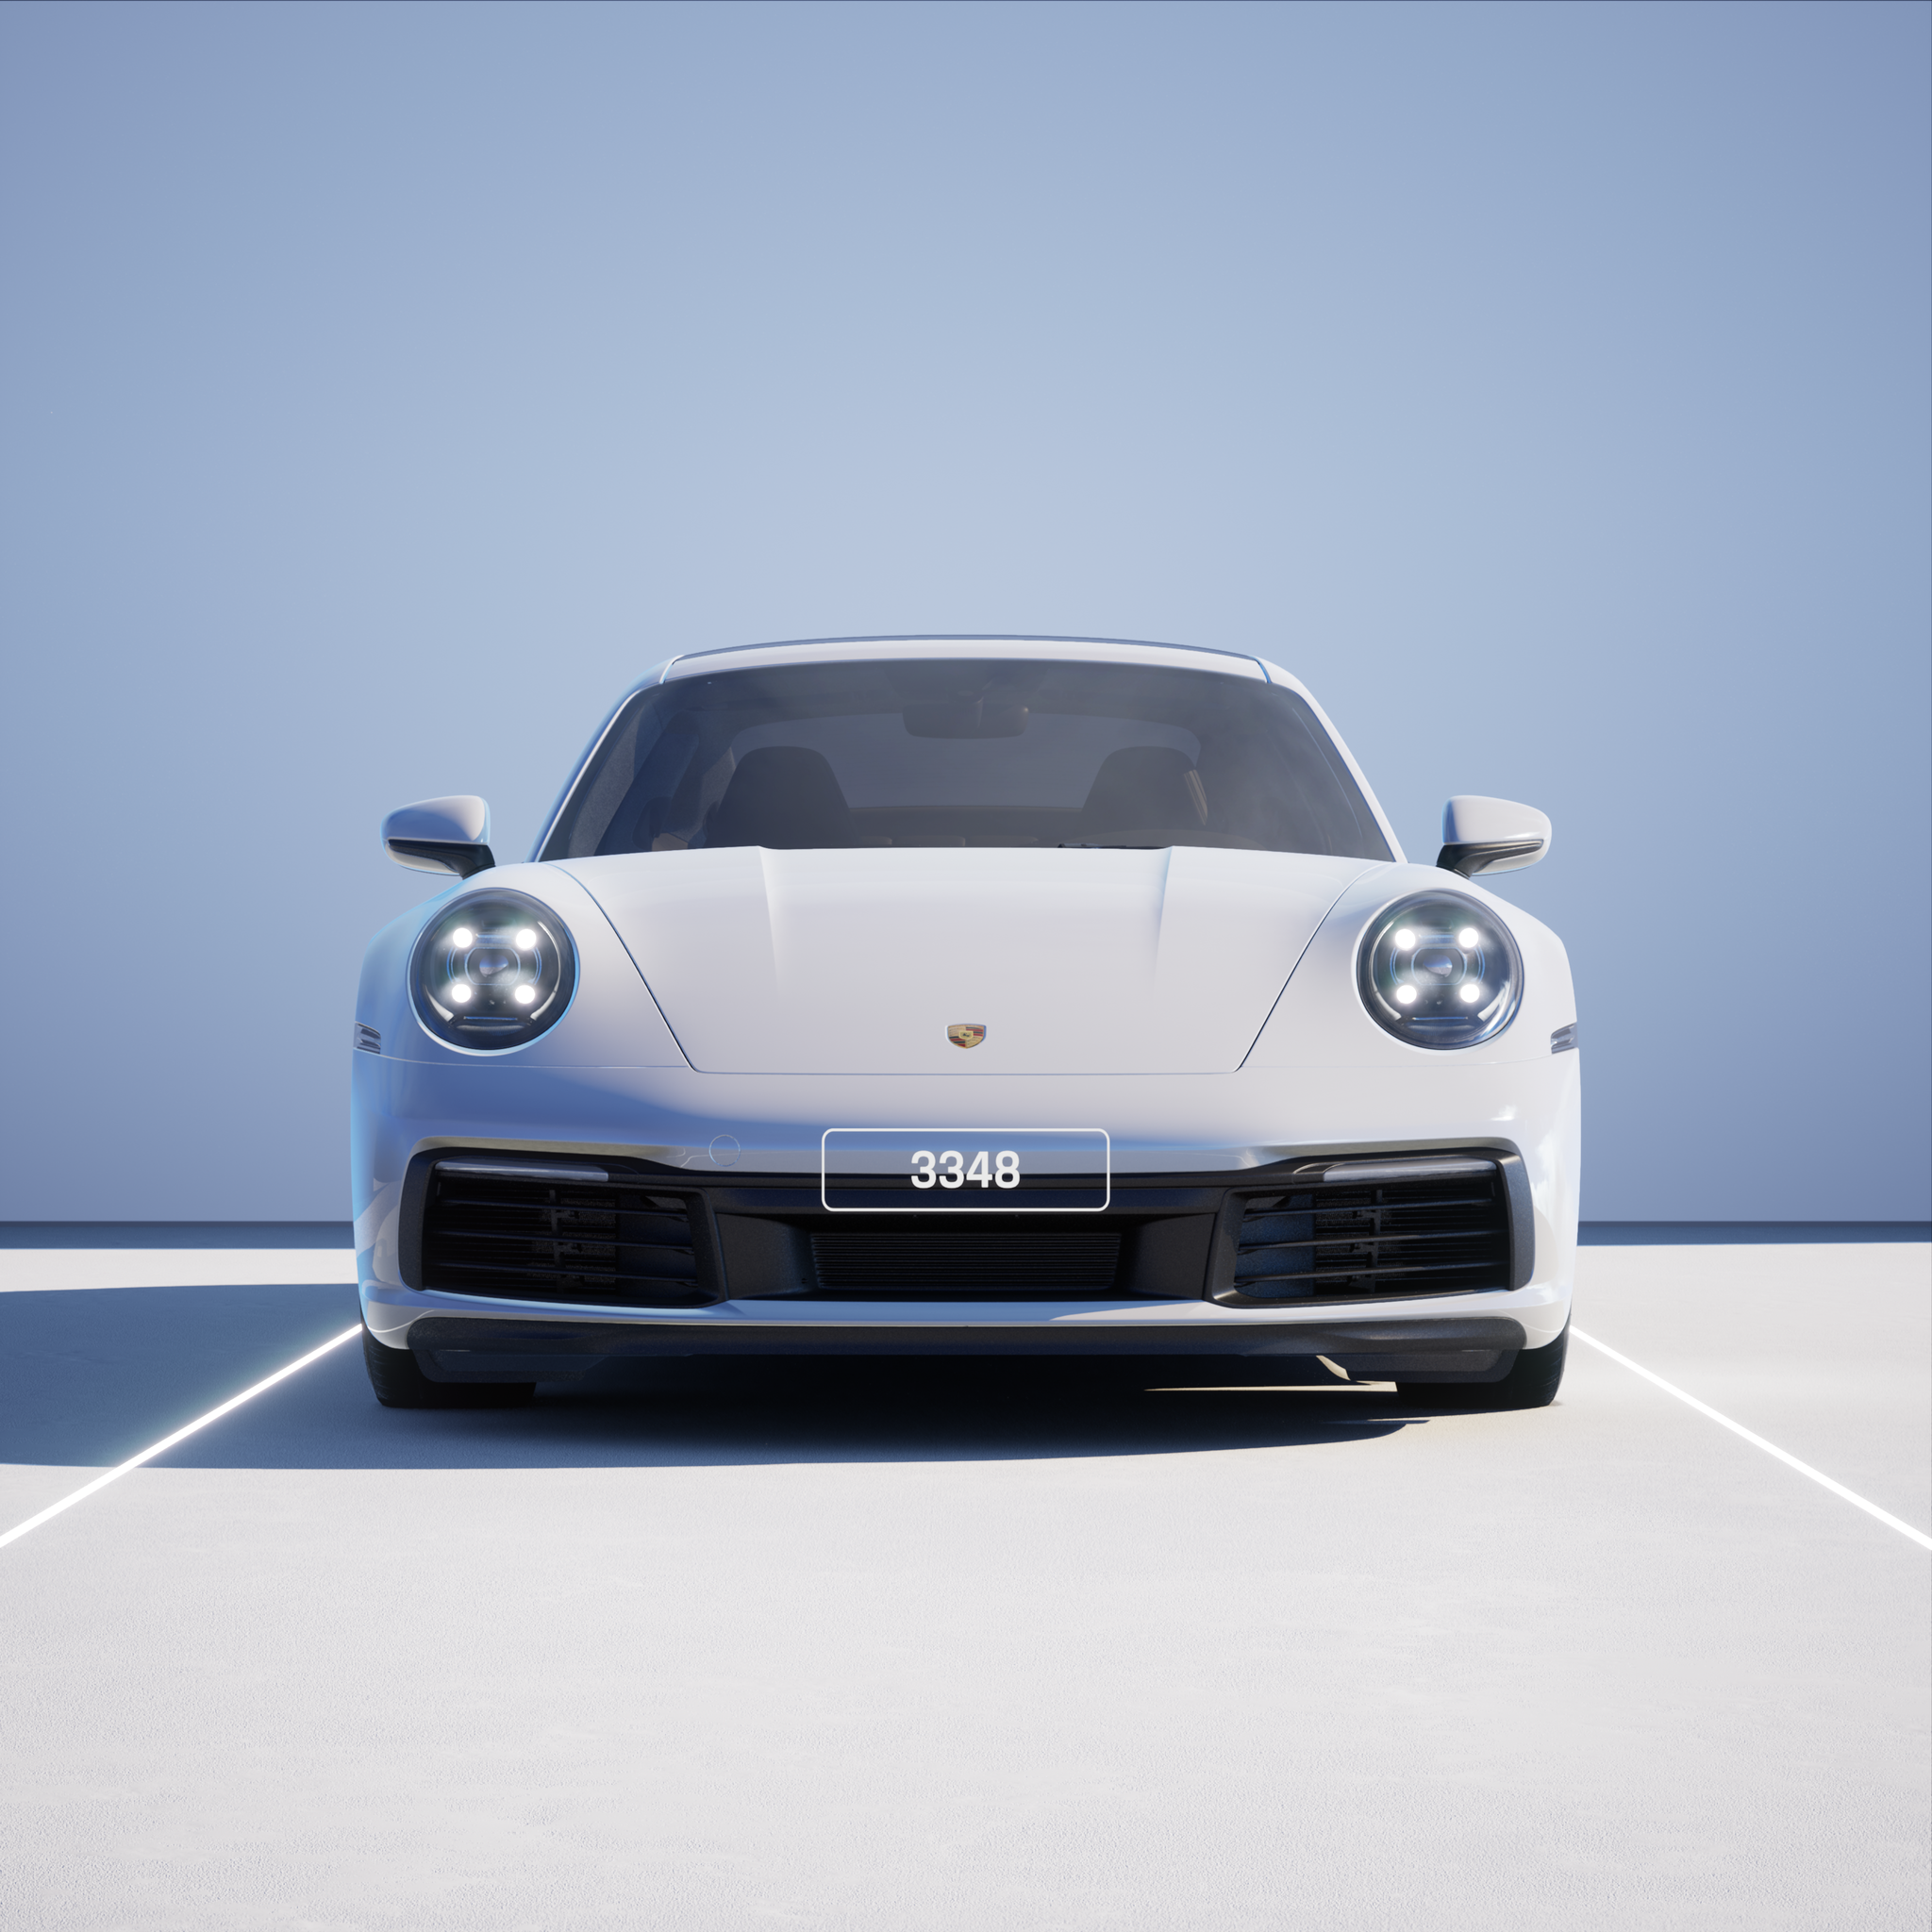 The PORSCHΞ 911 3348 image in phase